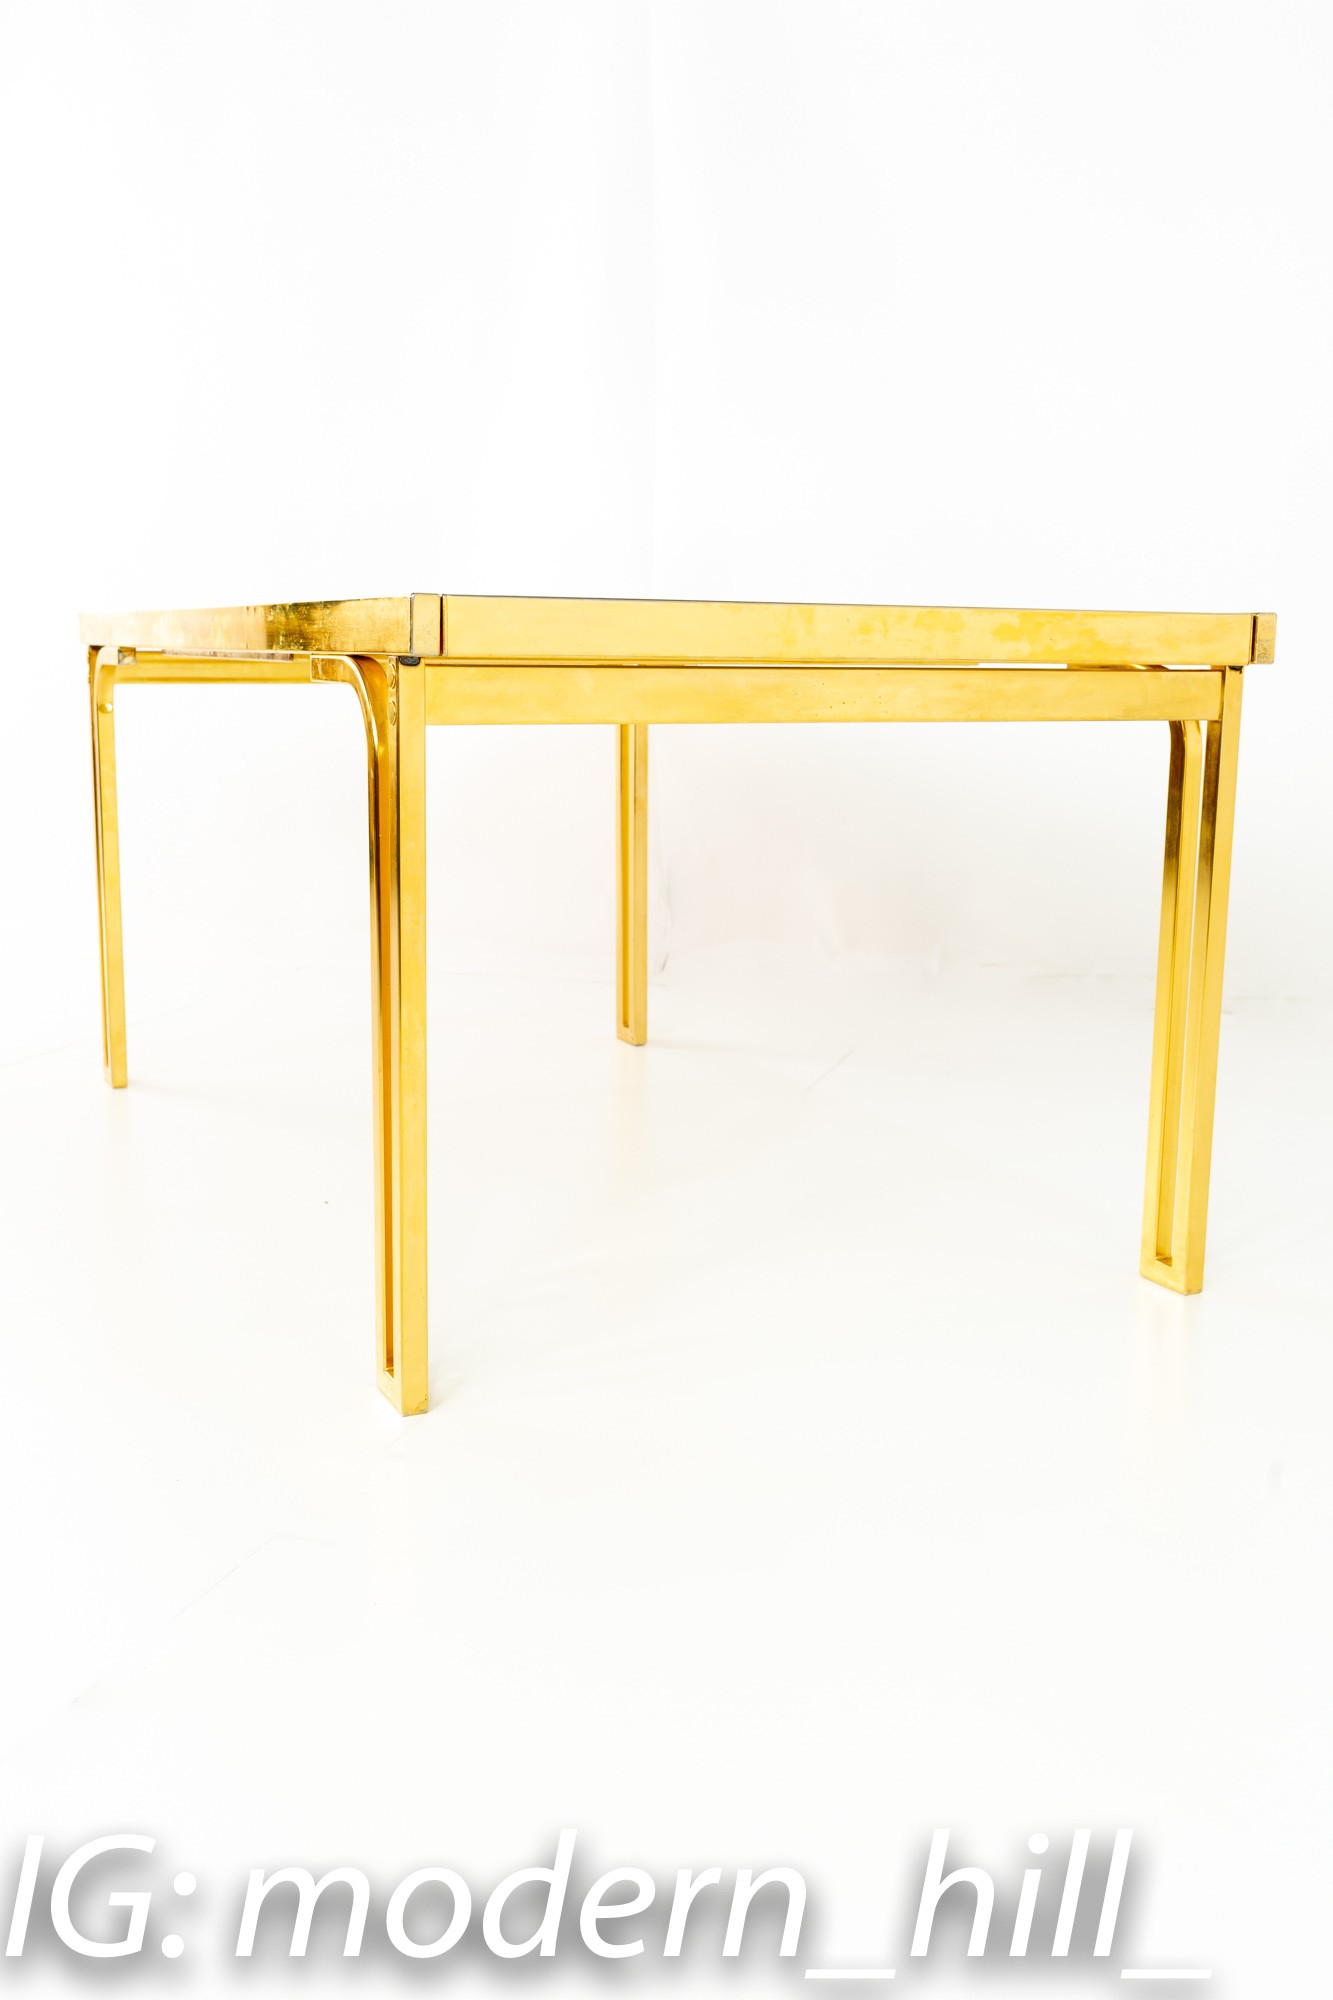 Brass and Glass Expandable Étagère in the Style of Milo Baughman –  Designers Collab.